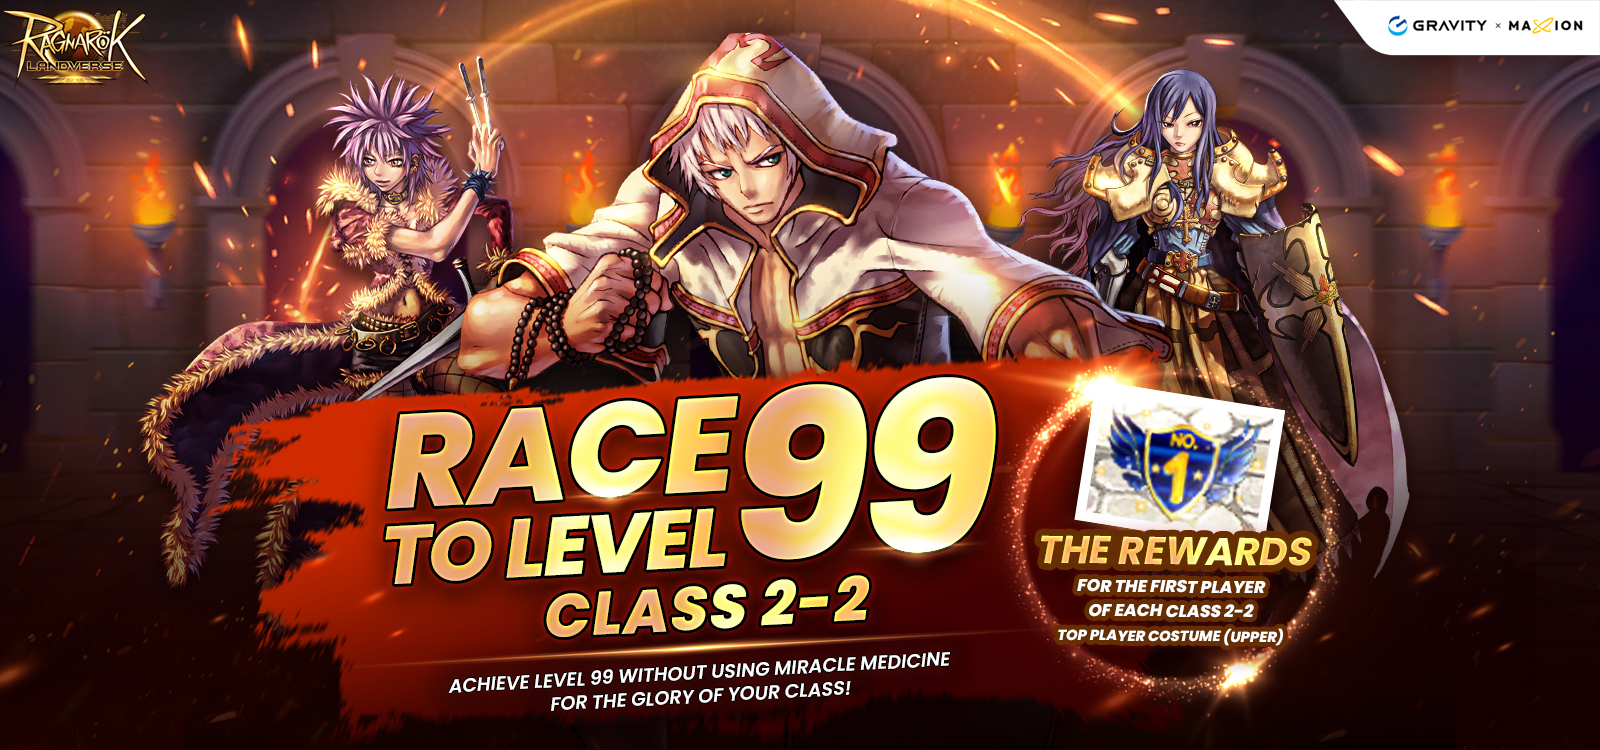 ROverse Class 2-2 Level 99 challenge